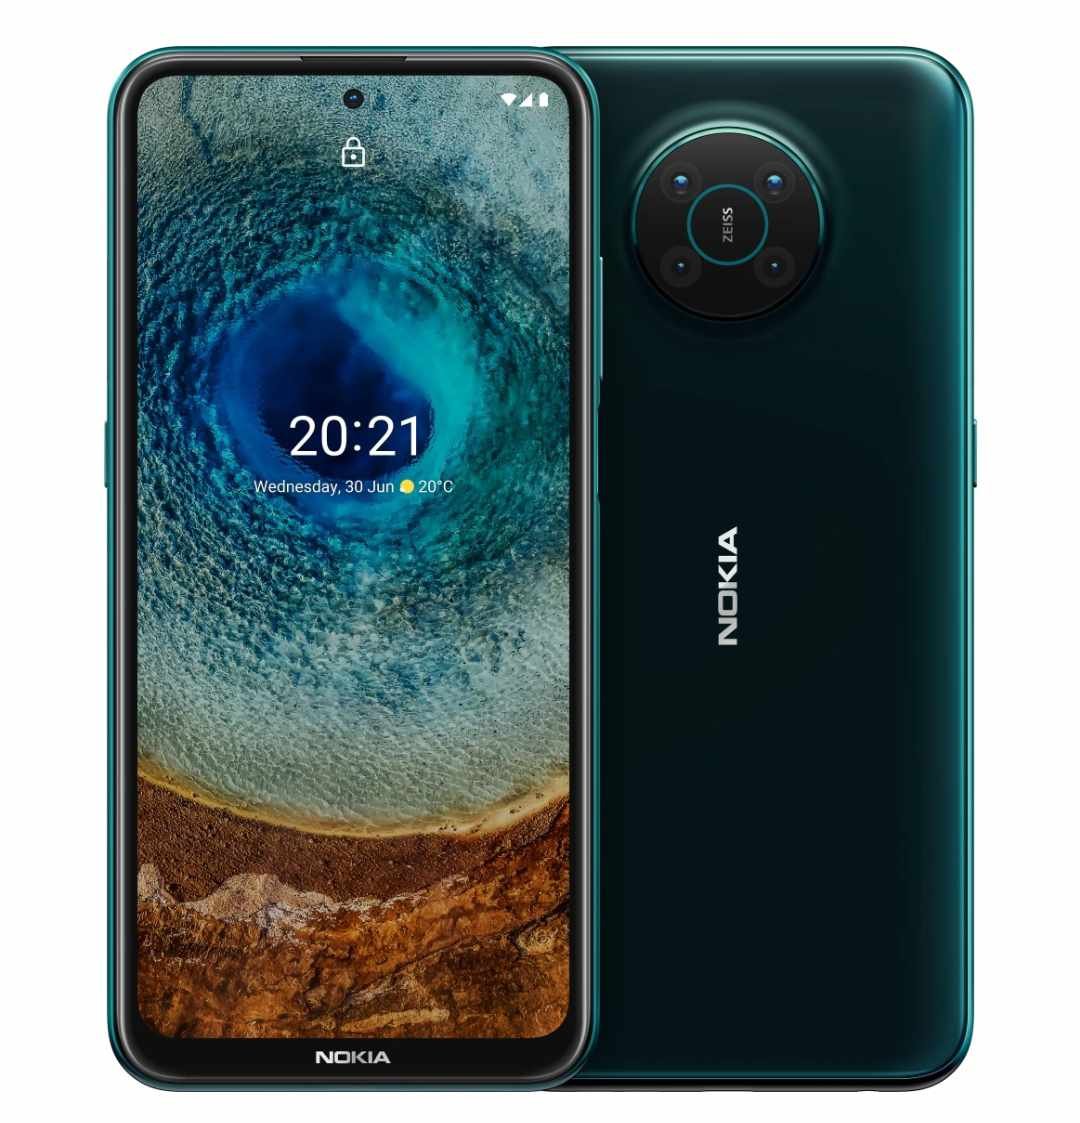 Nokia X10 Price and Specs: 5G, Camera, SoC, and More